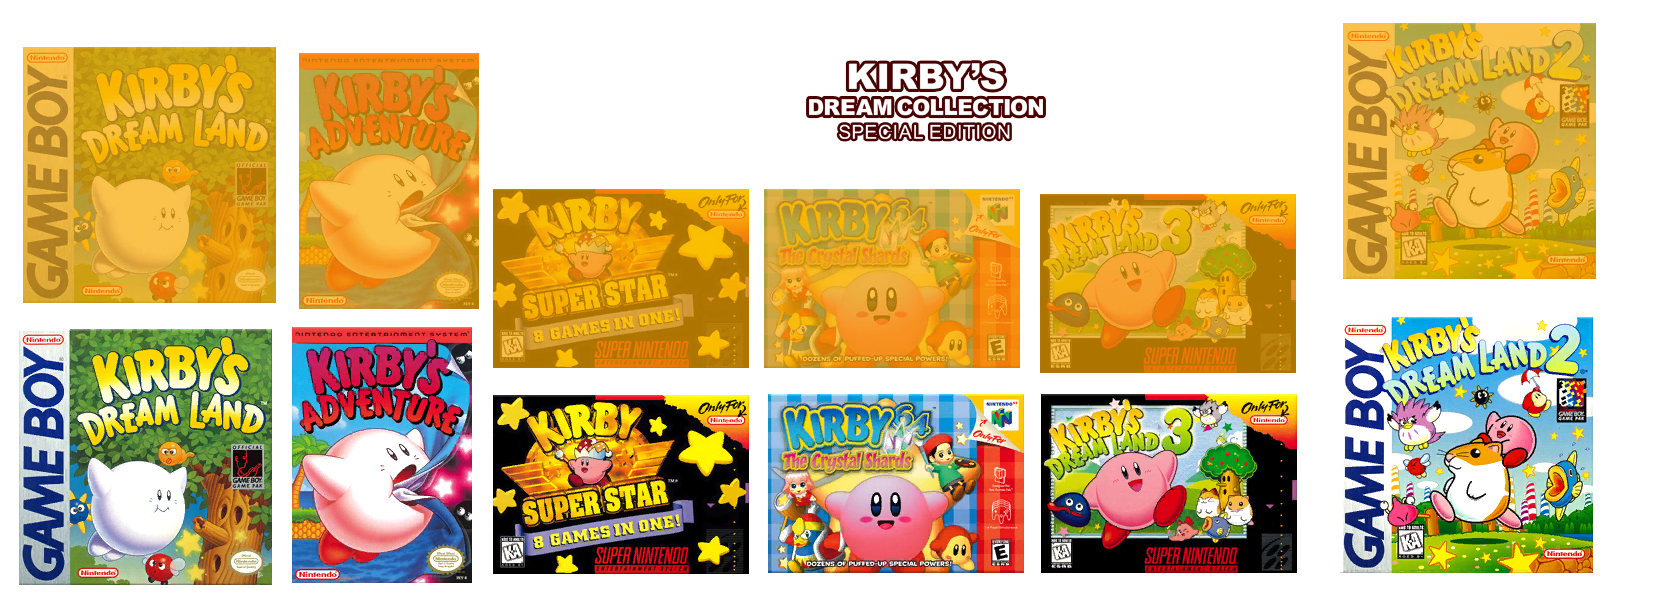 Kirby's Dream Collection - Game Select